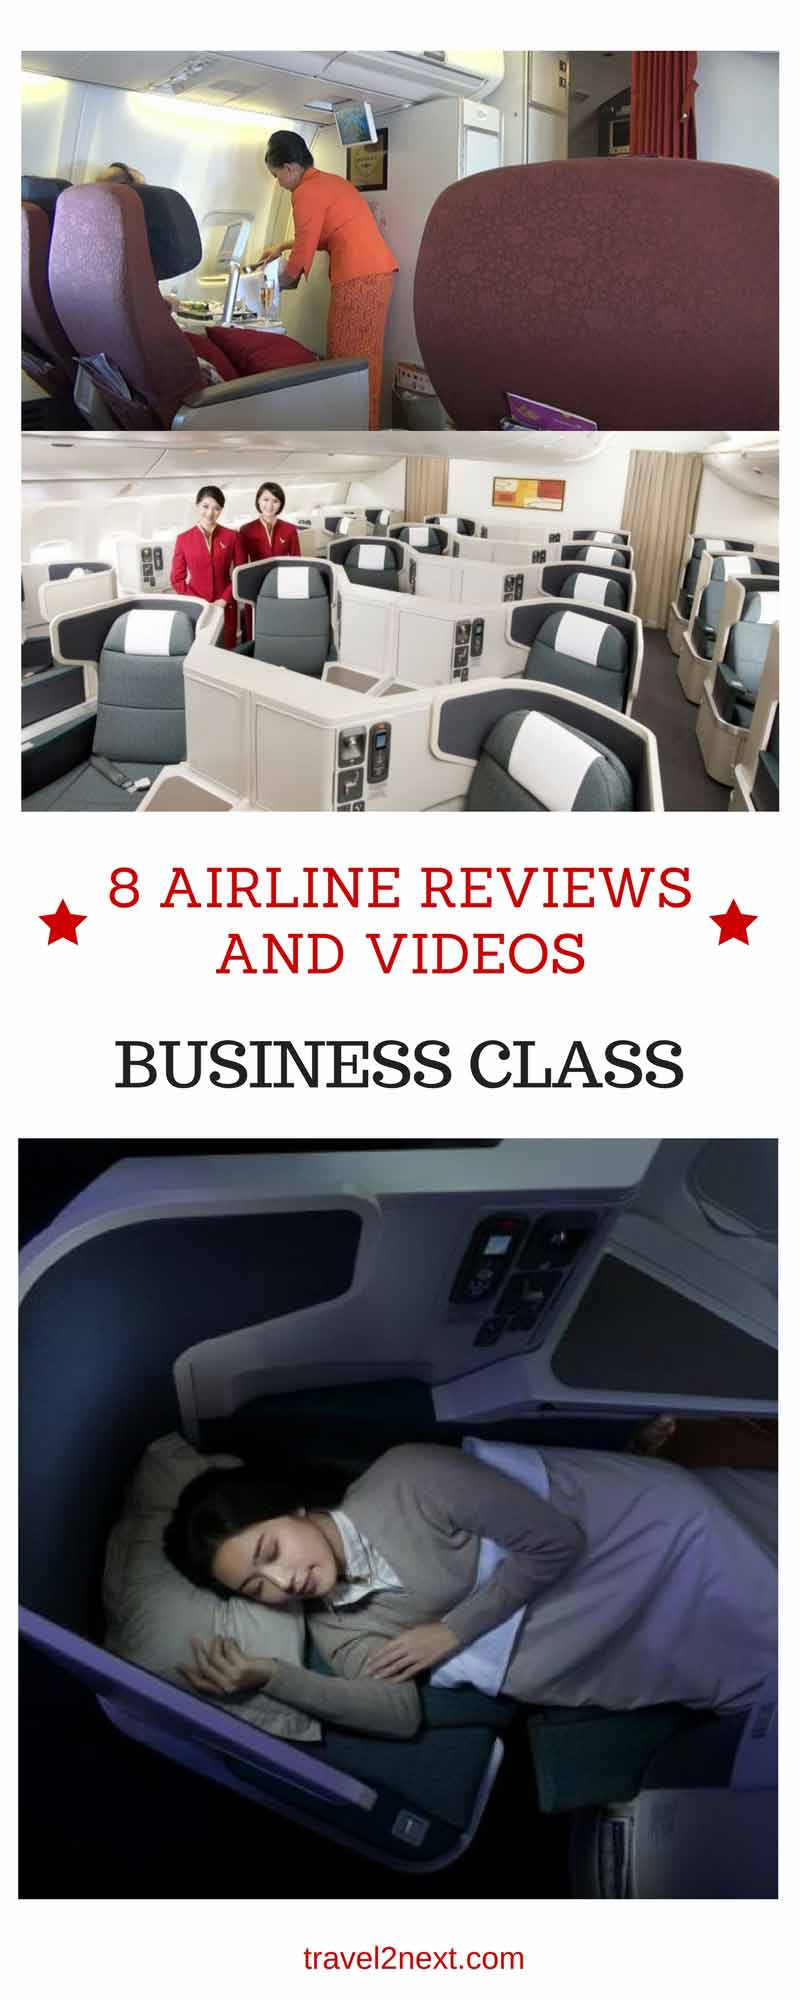 8 airline reviews and videos